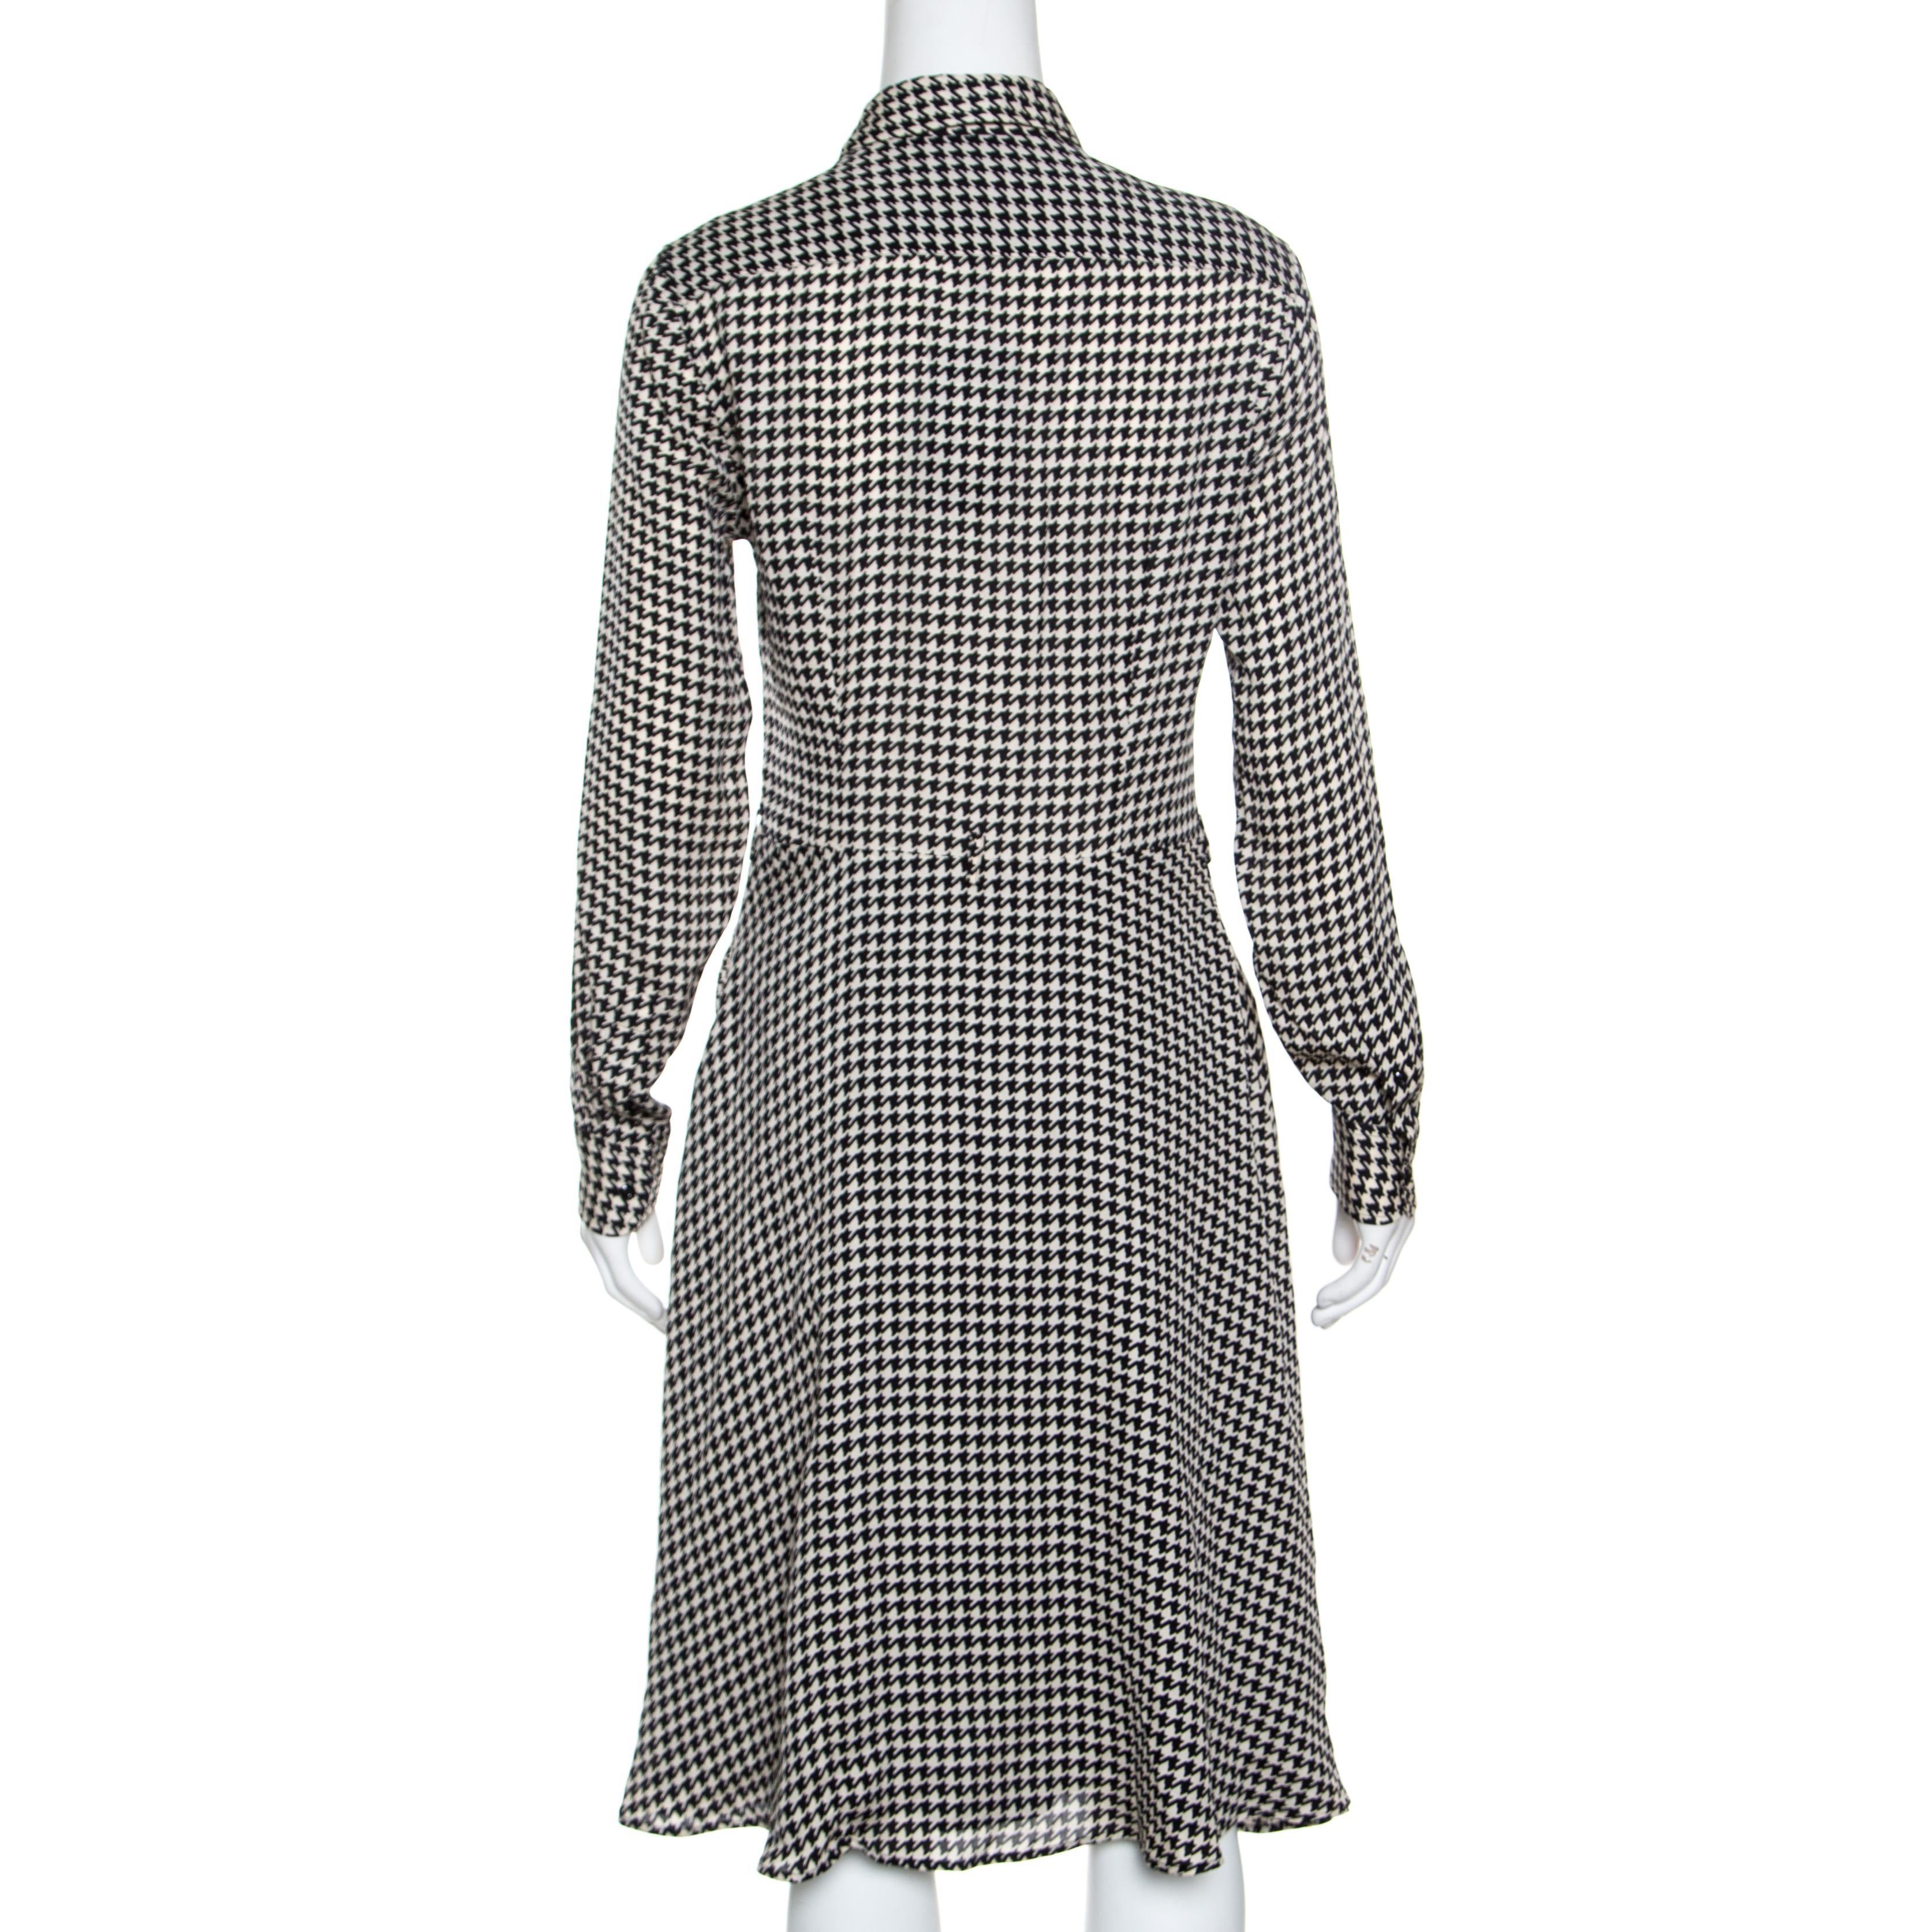 Bridging the gap between formal and casual, this Austin shirt dress from Ralph Lauren is a smart choice for work dos along with being a calm option for weekends. Featuring a monochrome houndstooth pattern throughout and a flouncy bottom, this one is